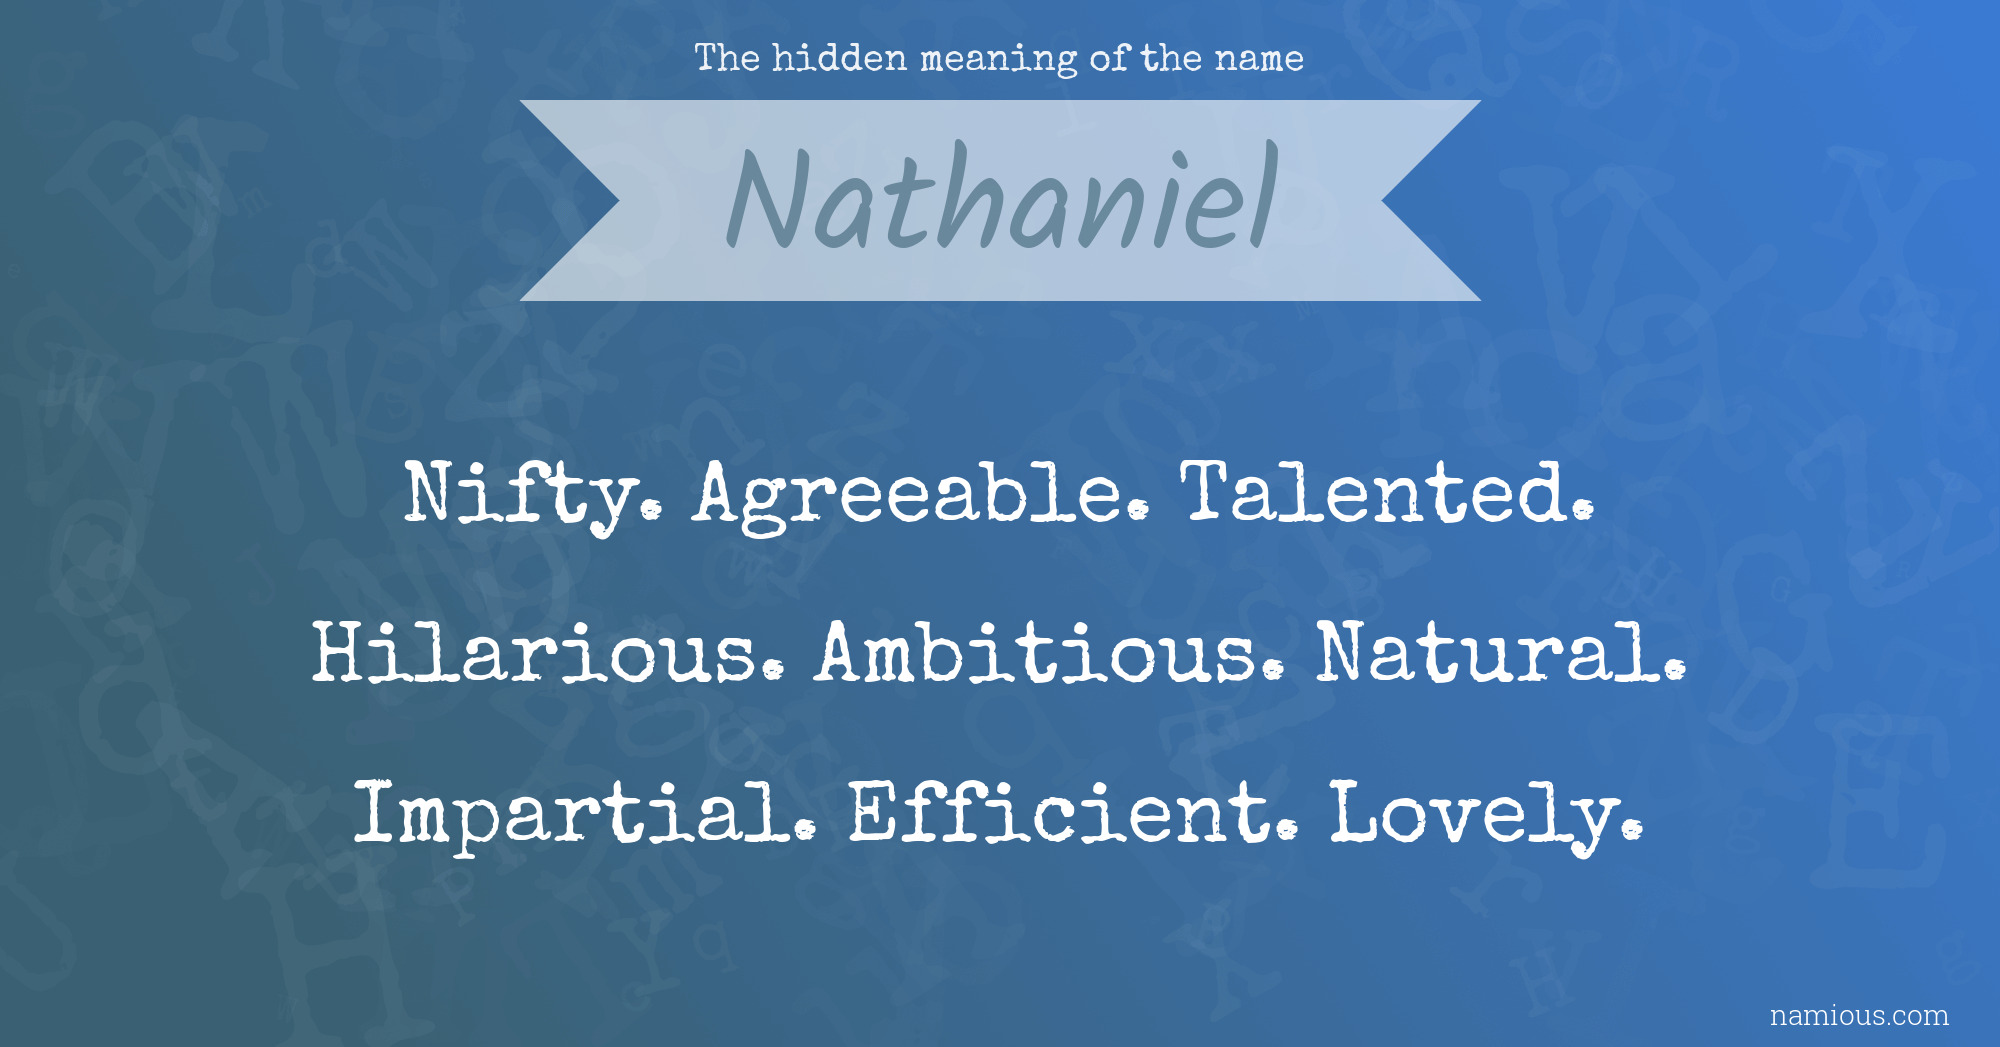 The hidden meaning of the name Nathaniel